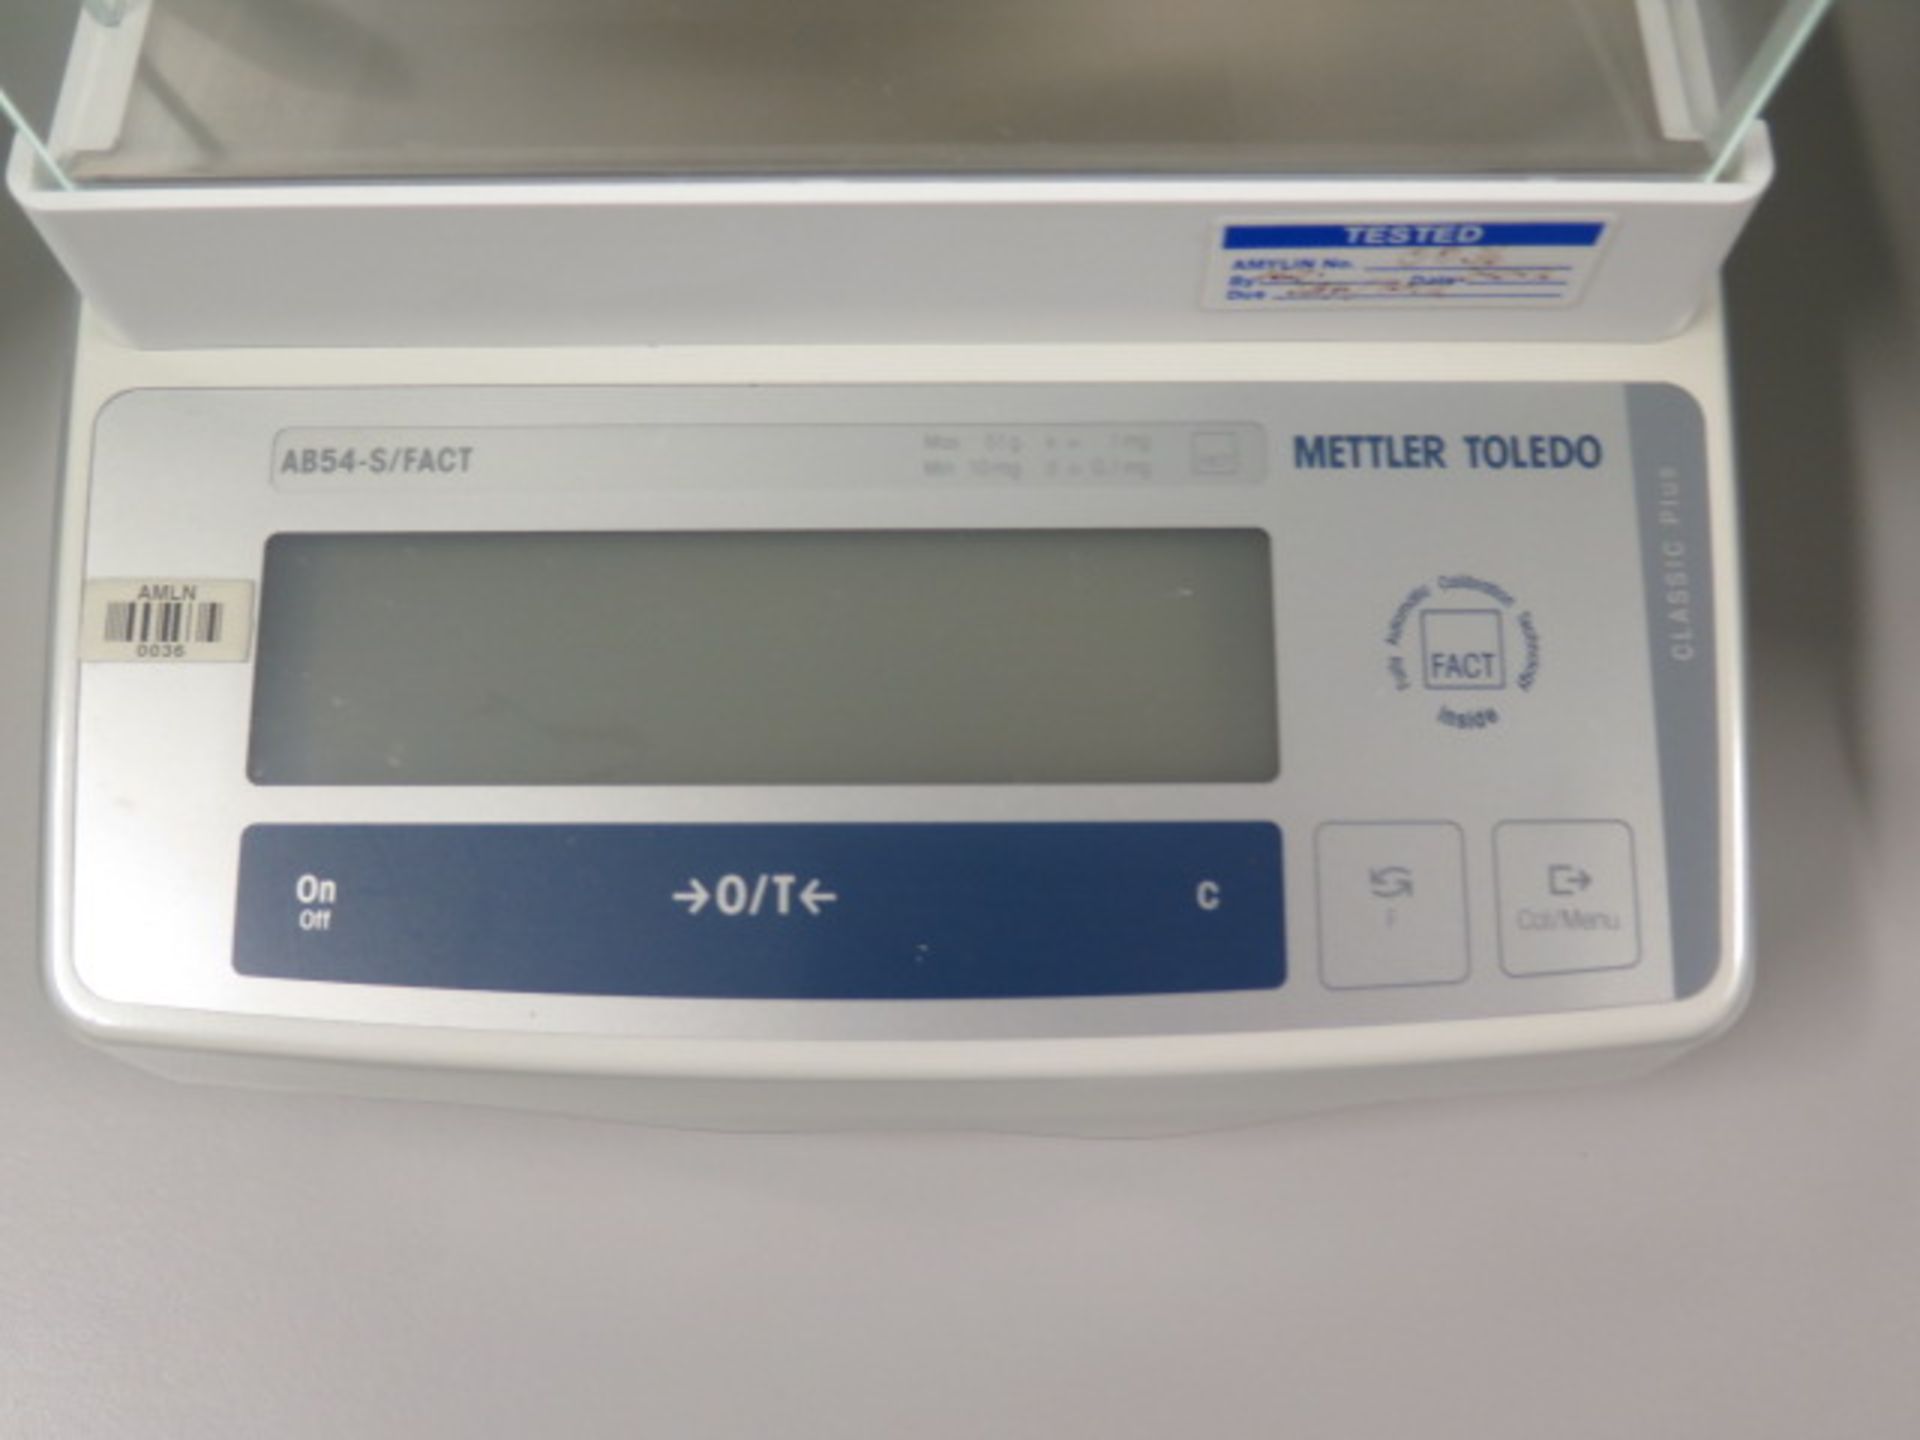 Mettler Toledo AB54-S/FACT Digital Analytical Balance Scale | Loading Price: Hand Carry or Contact - Image 3 of 4